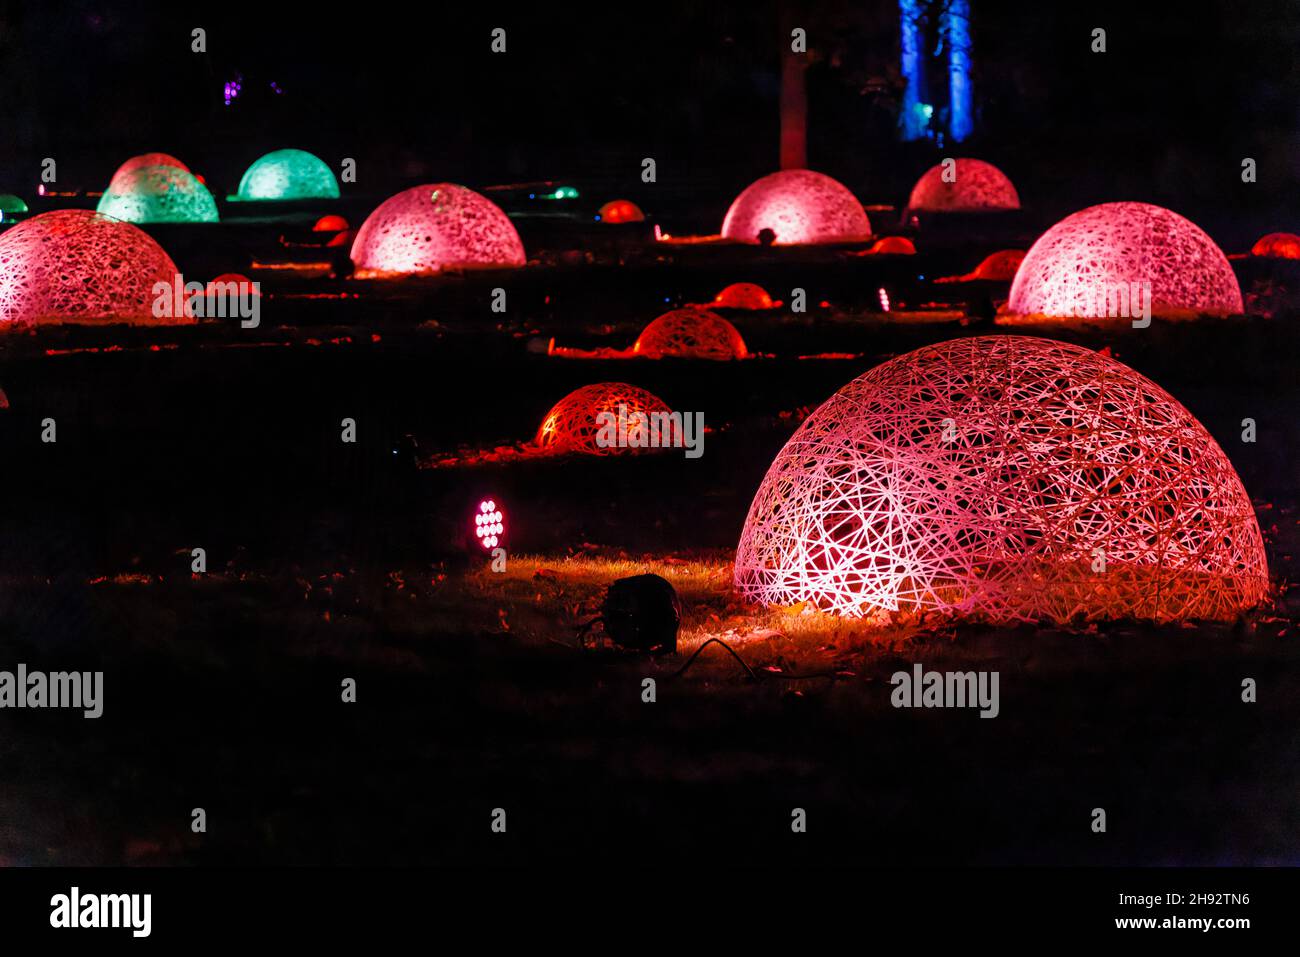 Colourful red illuminated wicker domes at Glow 2021, the annual Christmas illuminations event at the RHS Garden, Wisley, Woking, Surrey Stock Photo